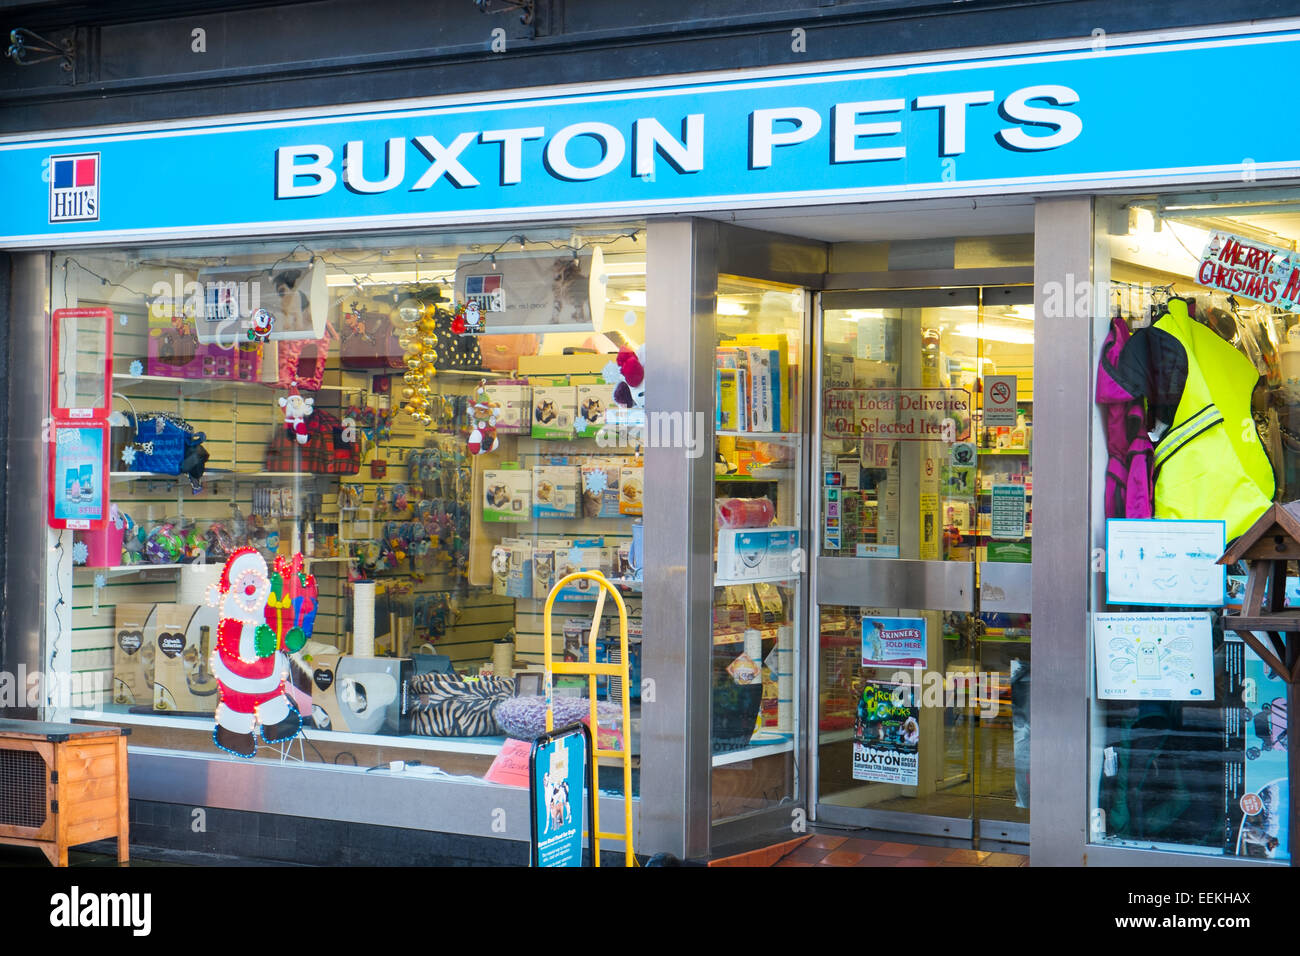 Pet shop and store frontage in Buxton, Derbyshire,England Stock Photo